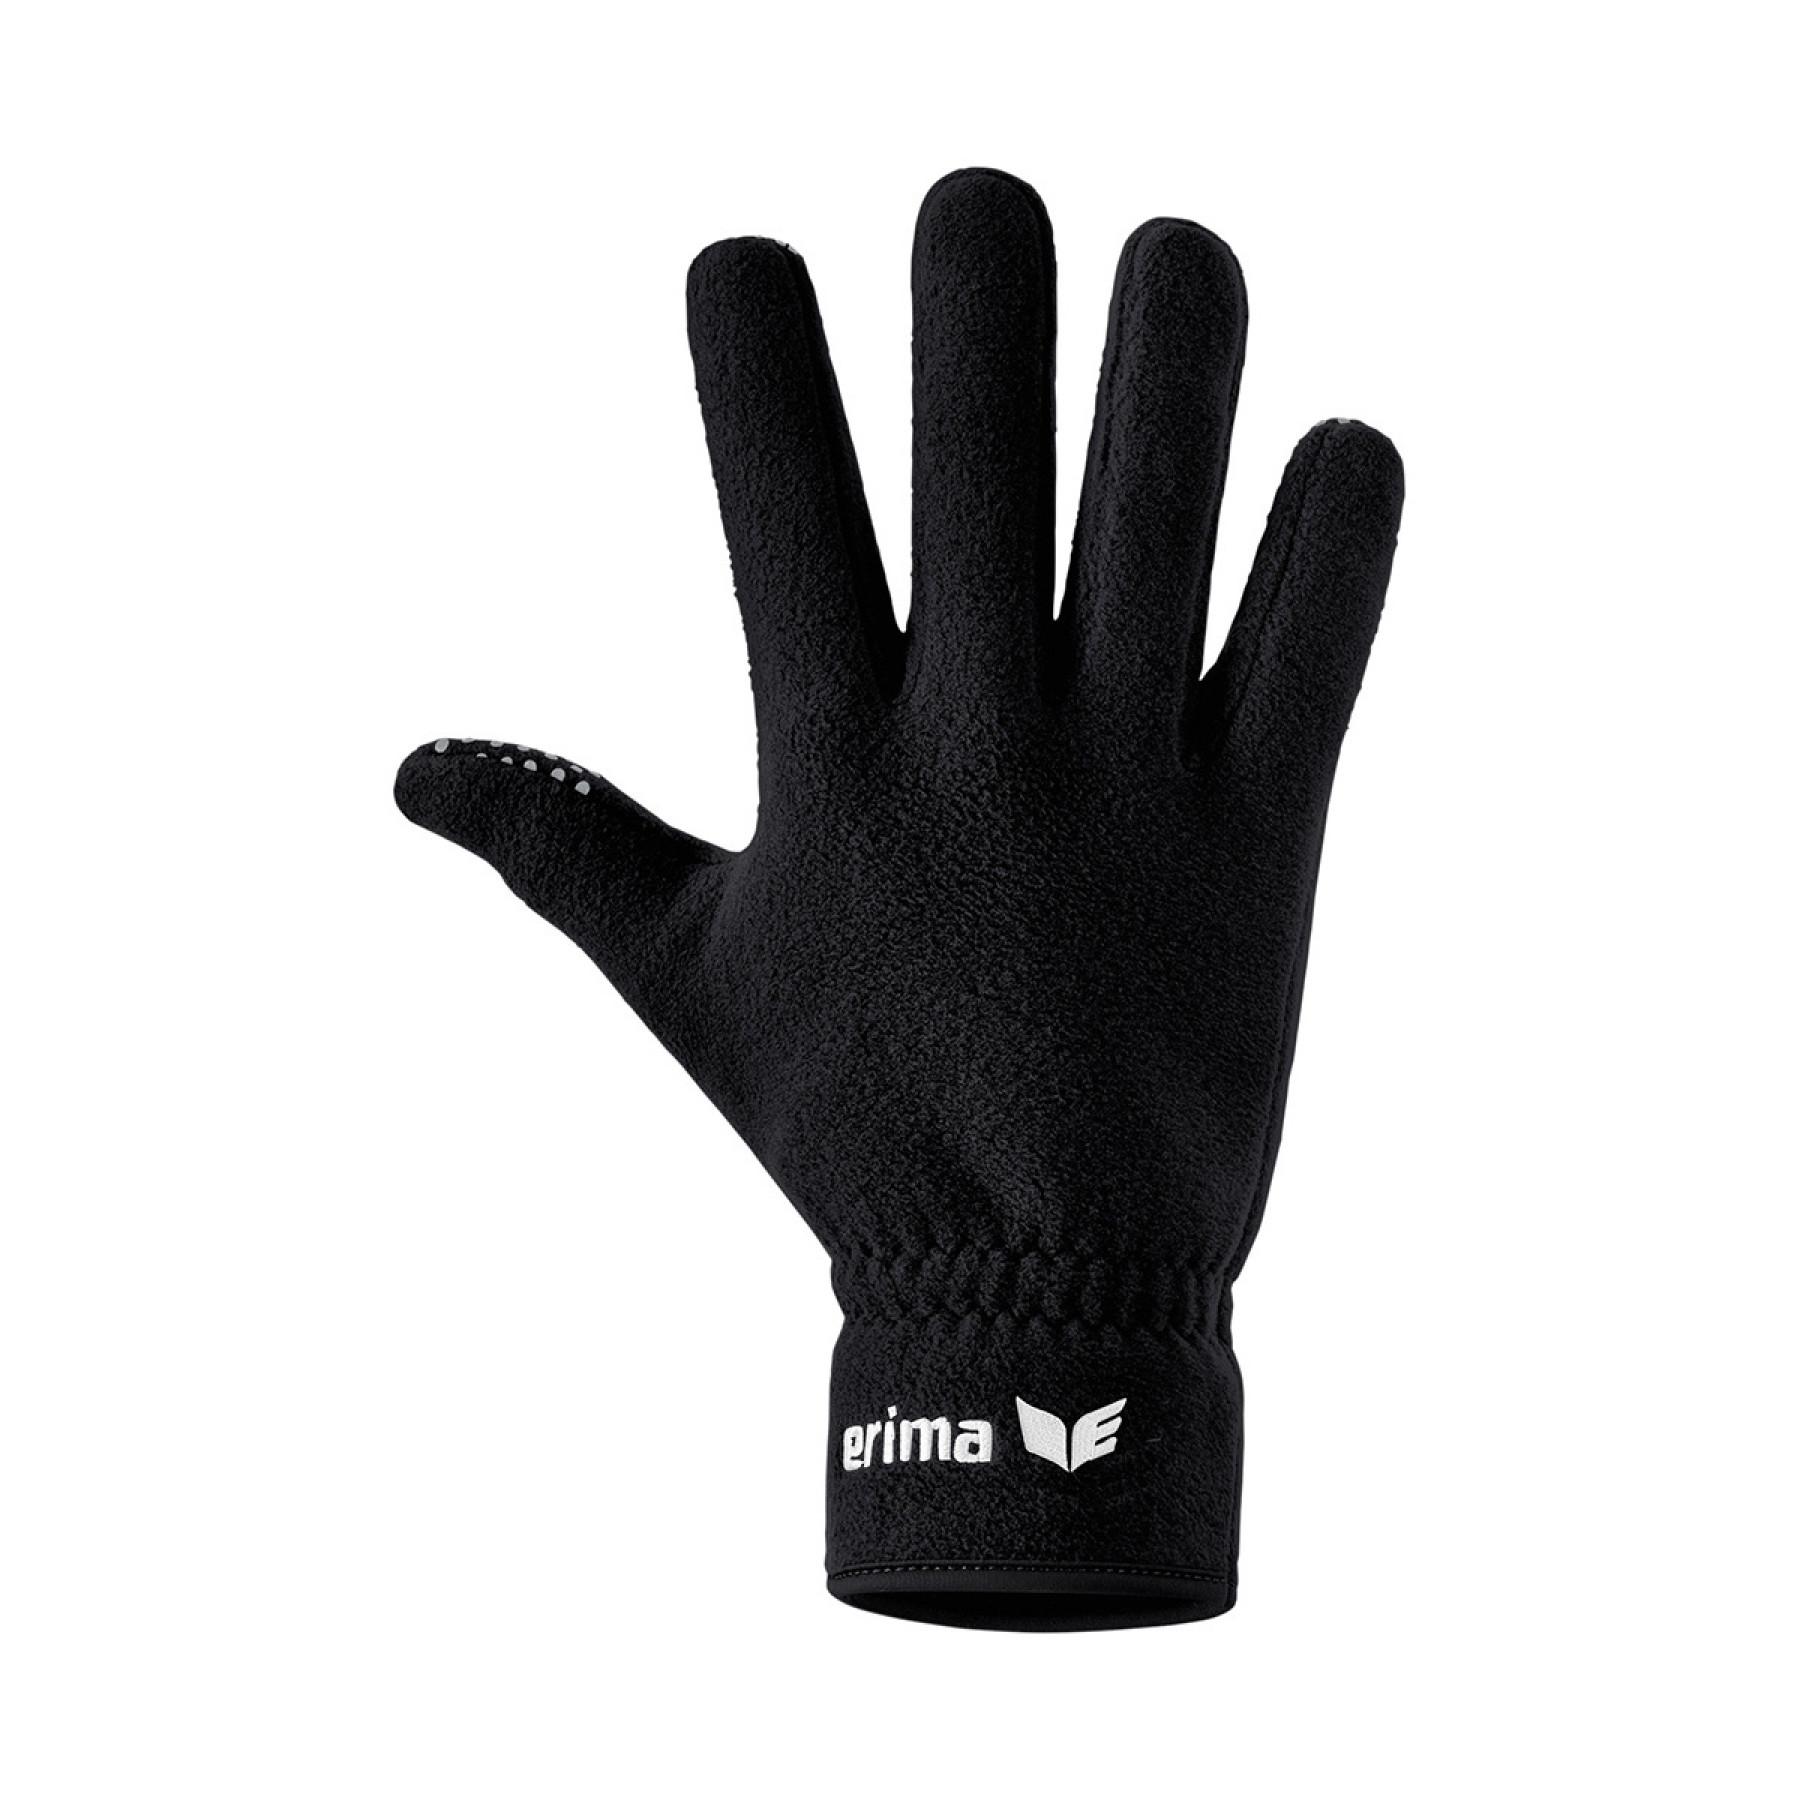 Goalkeeper gloves for outfield players Erima T4